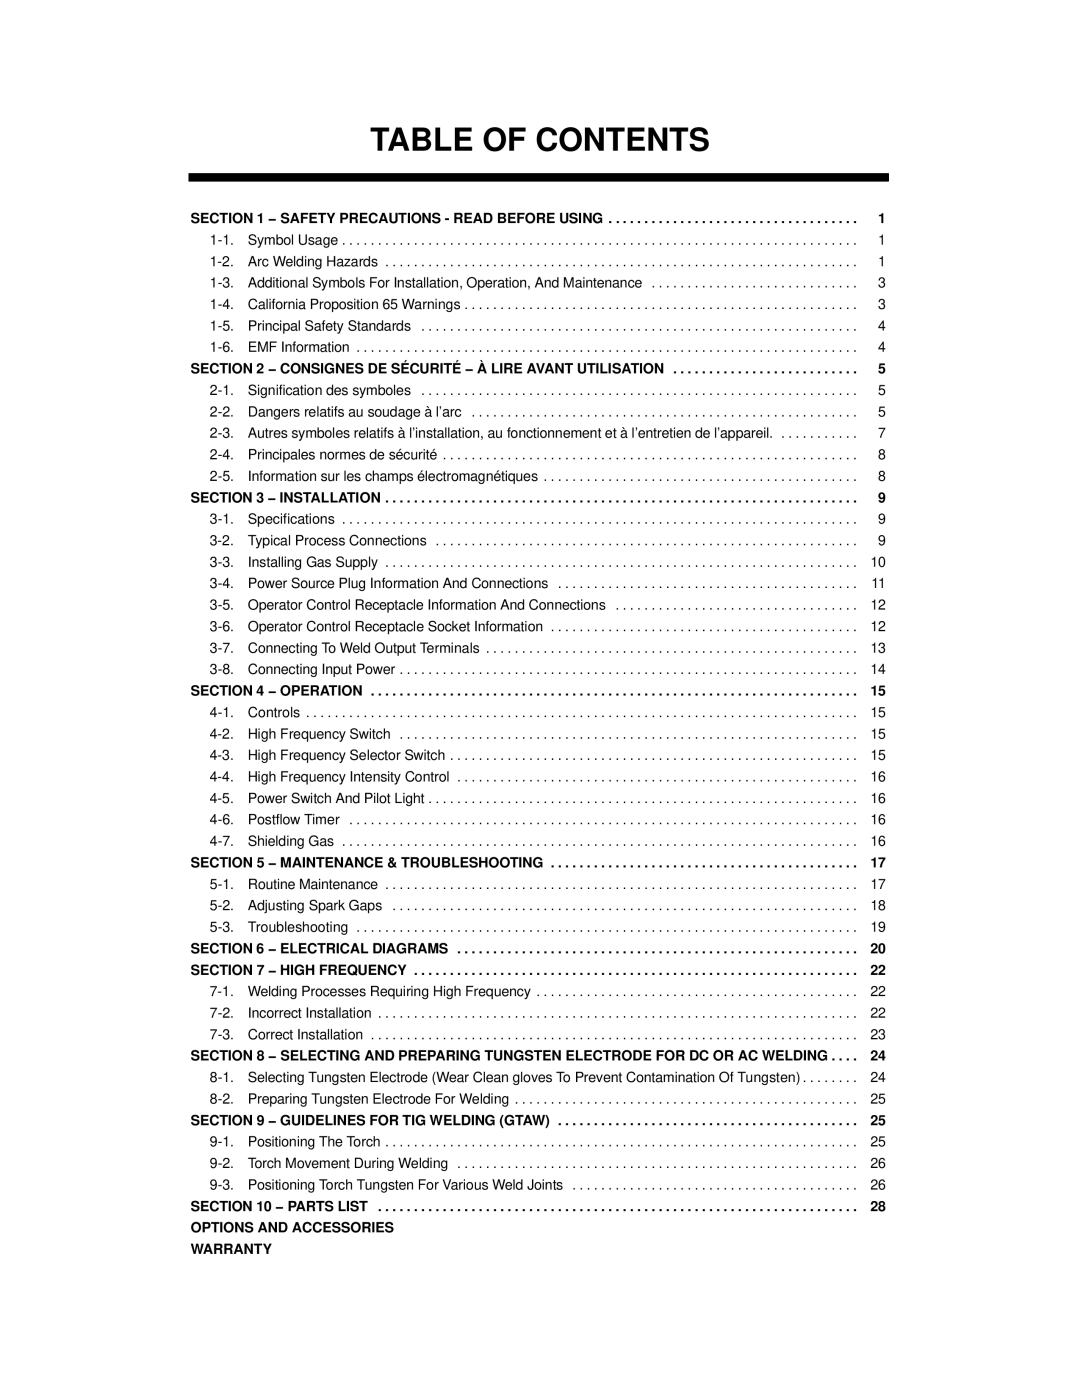 Miller Electric HF-251-2, HF-251D-1 manual Table of Contents 